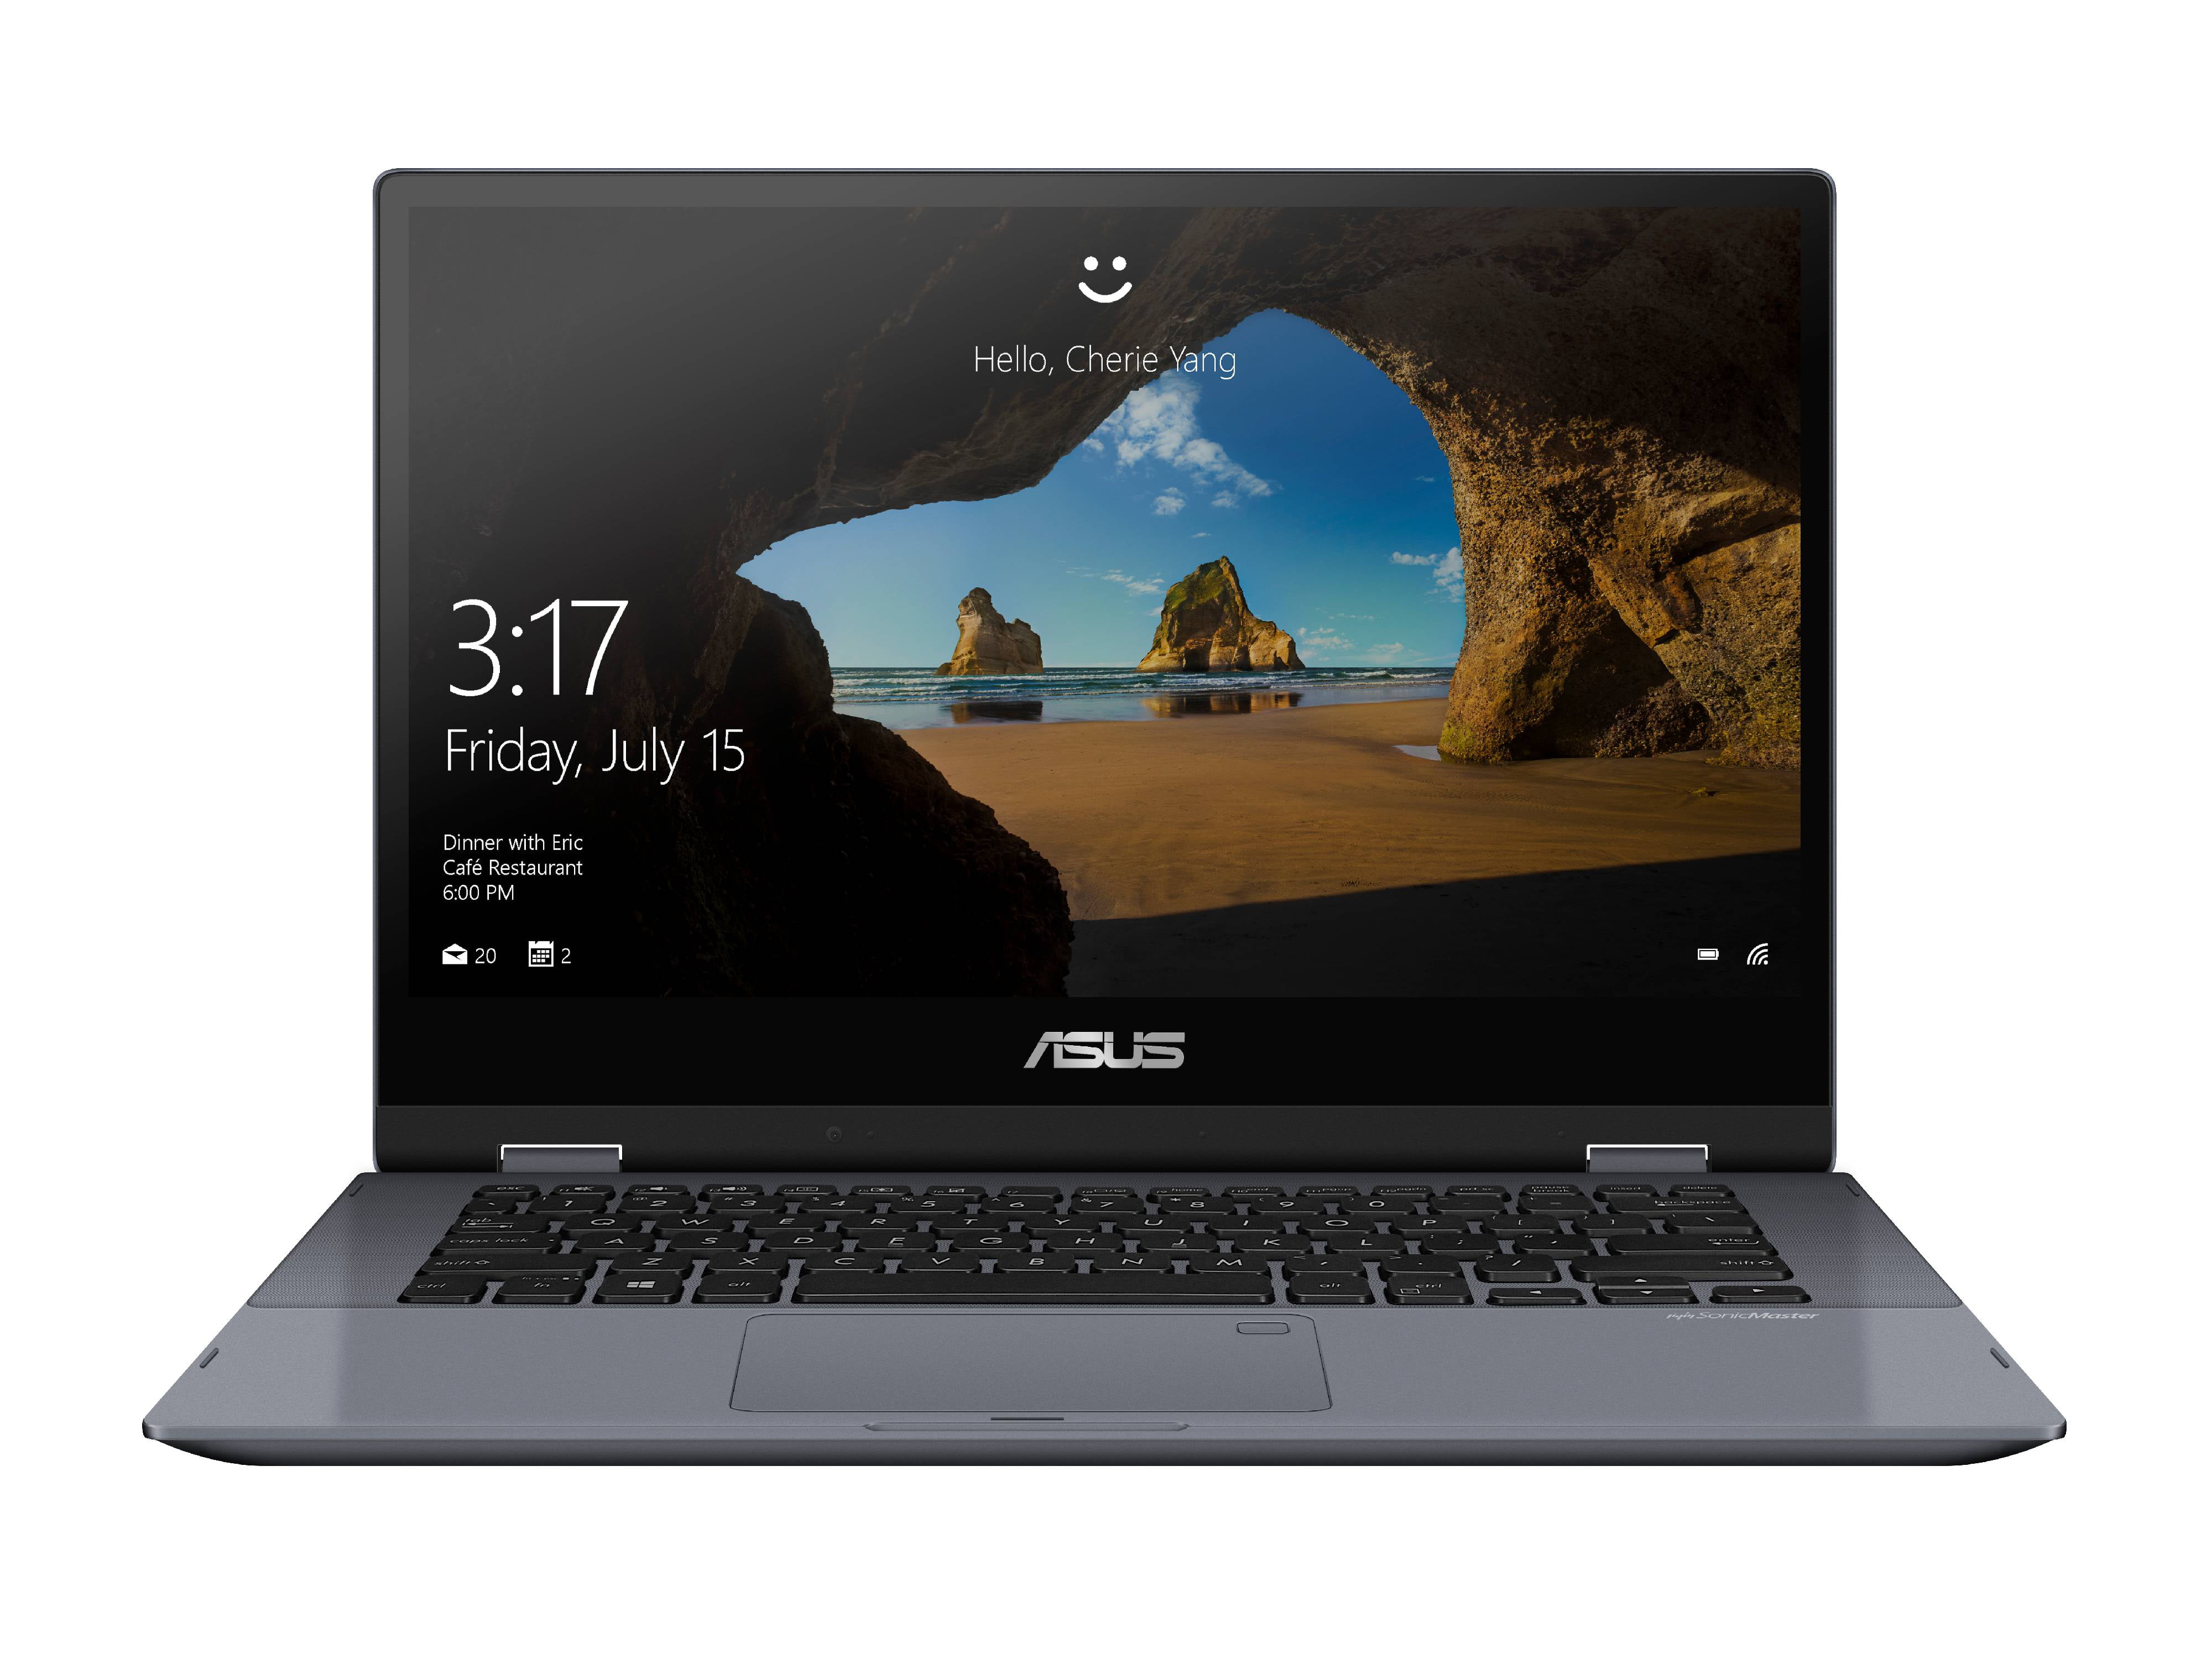 ASUS VivoBook Flip 14 Thin and Lightweight 2-in-1 Full HD Touchscreen  Laptop, 8th Gen Intel Core i3-8130U Processor (up to 3.4GHz), 4GB DDR4 RAM,  